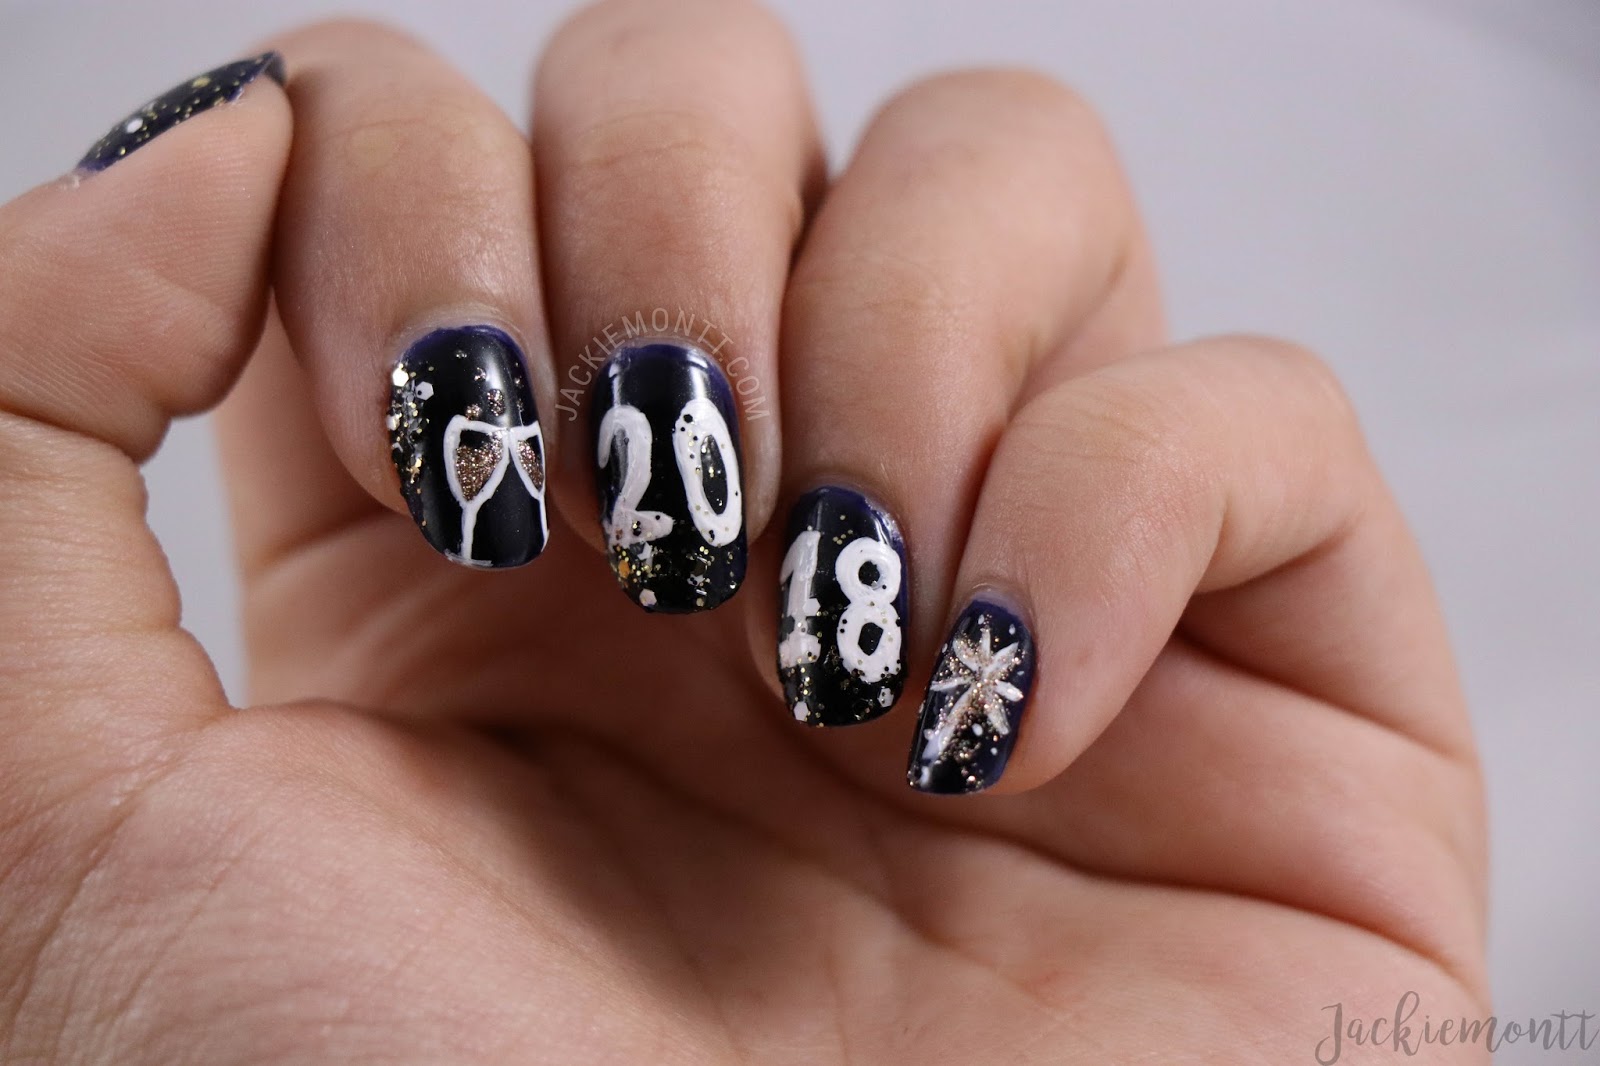 1. "New Year's Eve Nail Art Ideas for January" - wide 5